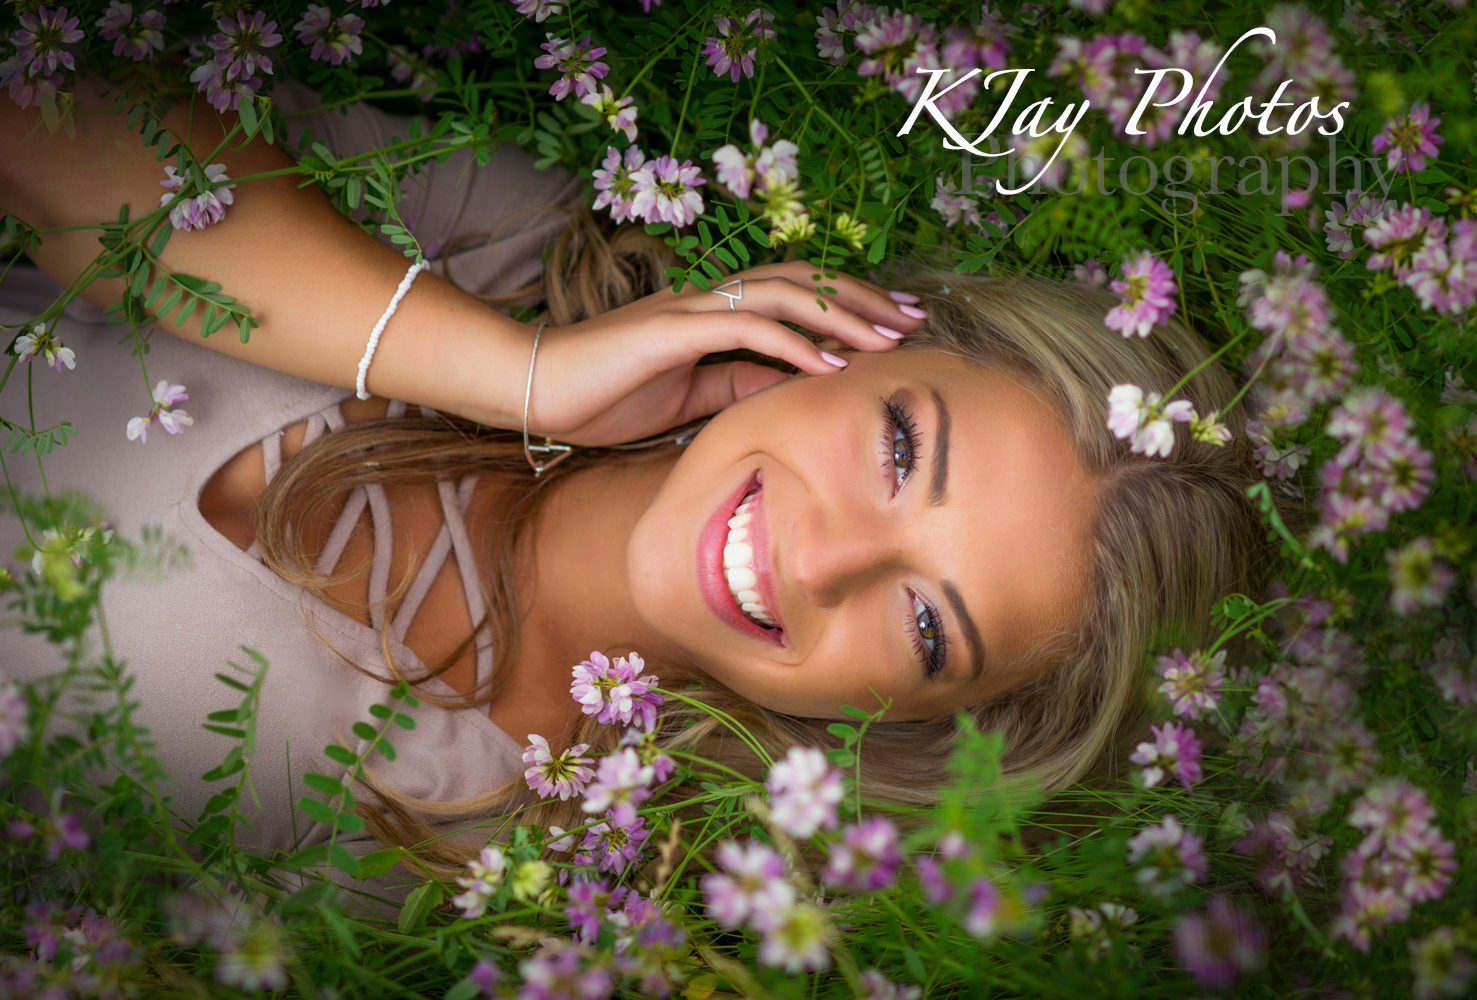 Madison WI Photographer specializing in high school senior pictures.